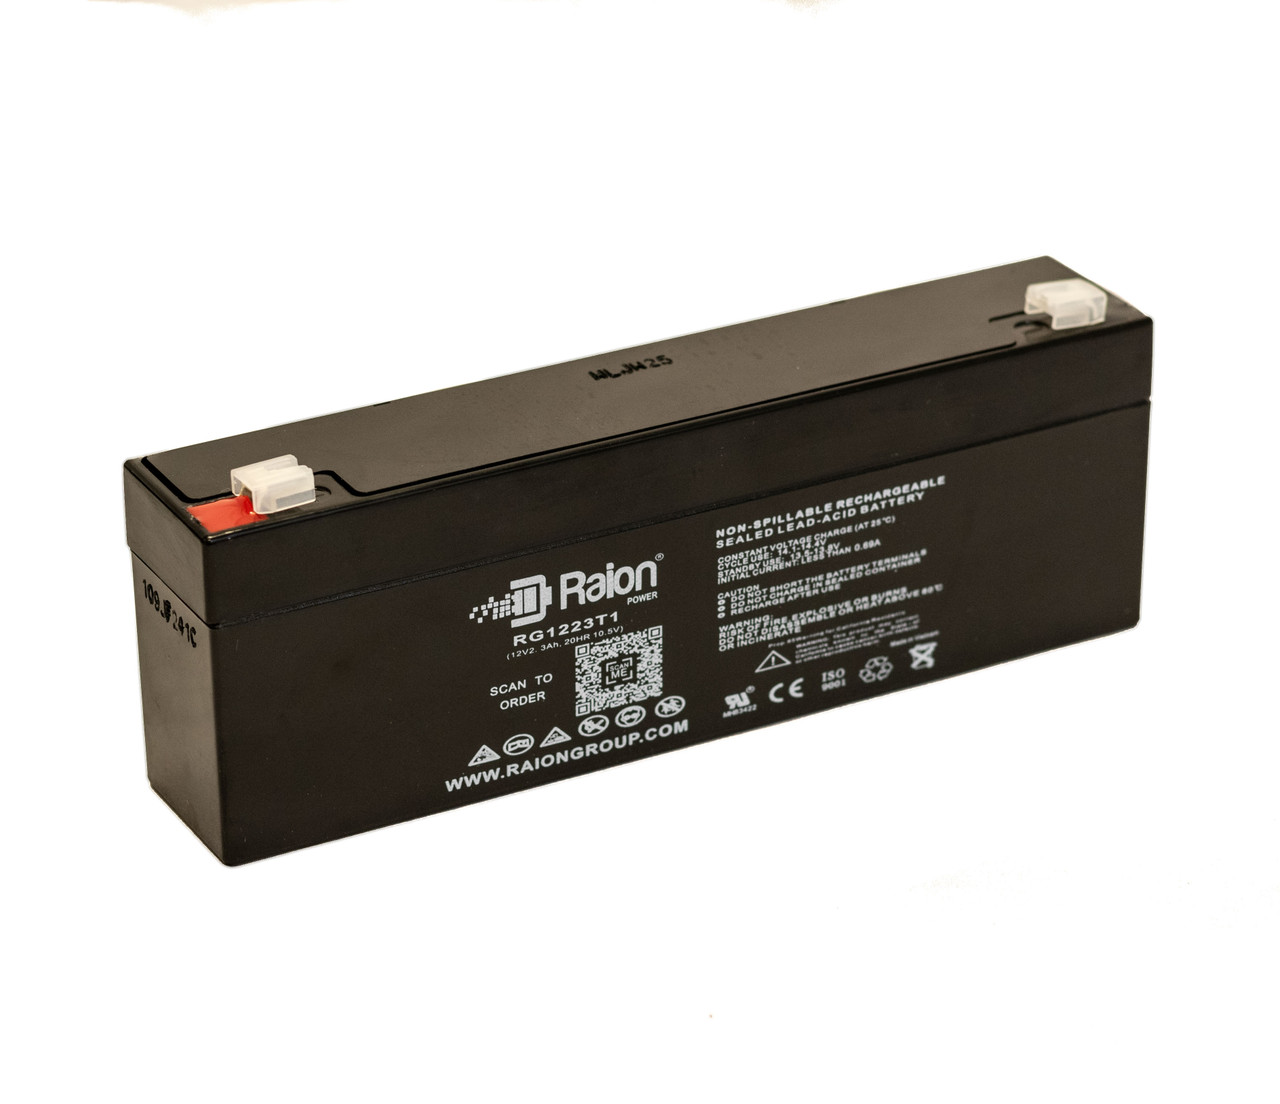 Raion Power RG1223T1 Replacement Battery for Narco Air Shields N15 Warm Weigh Infant Scale